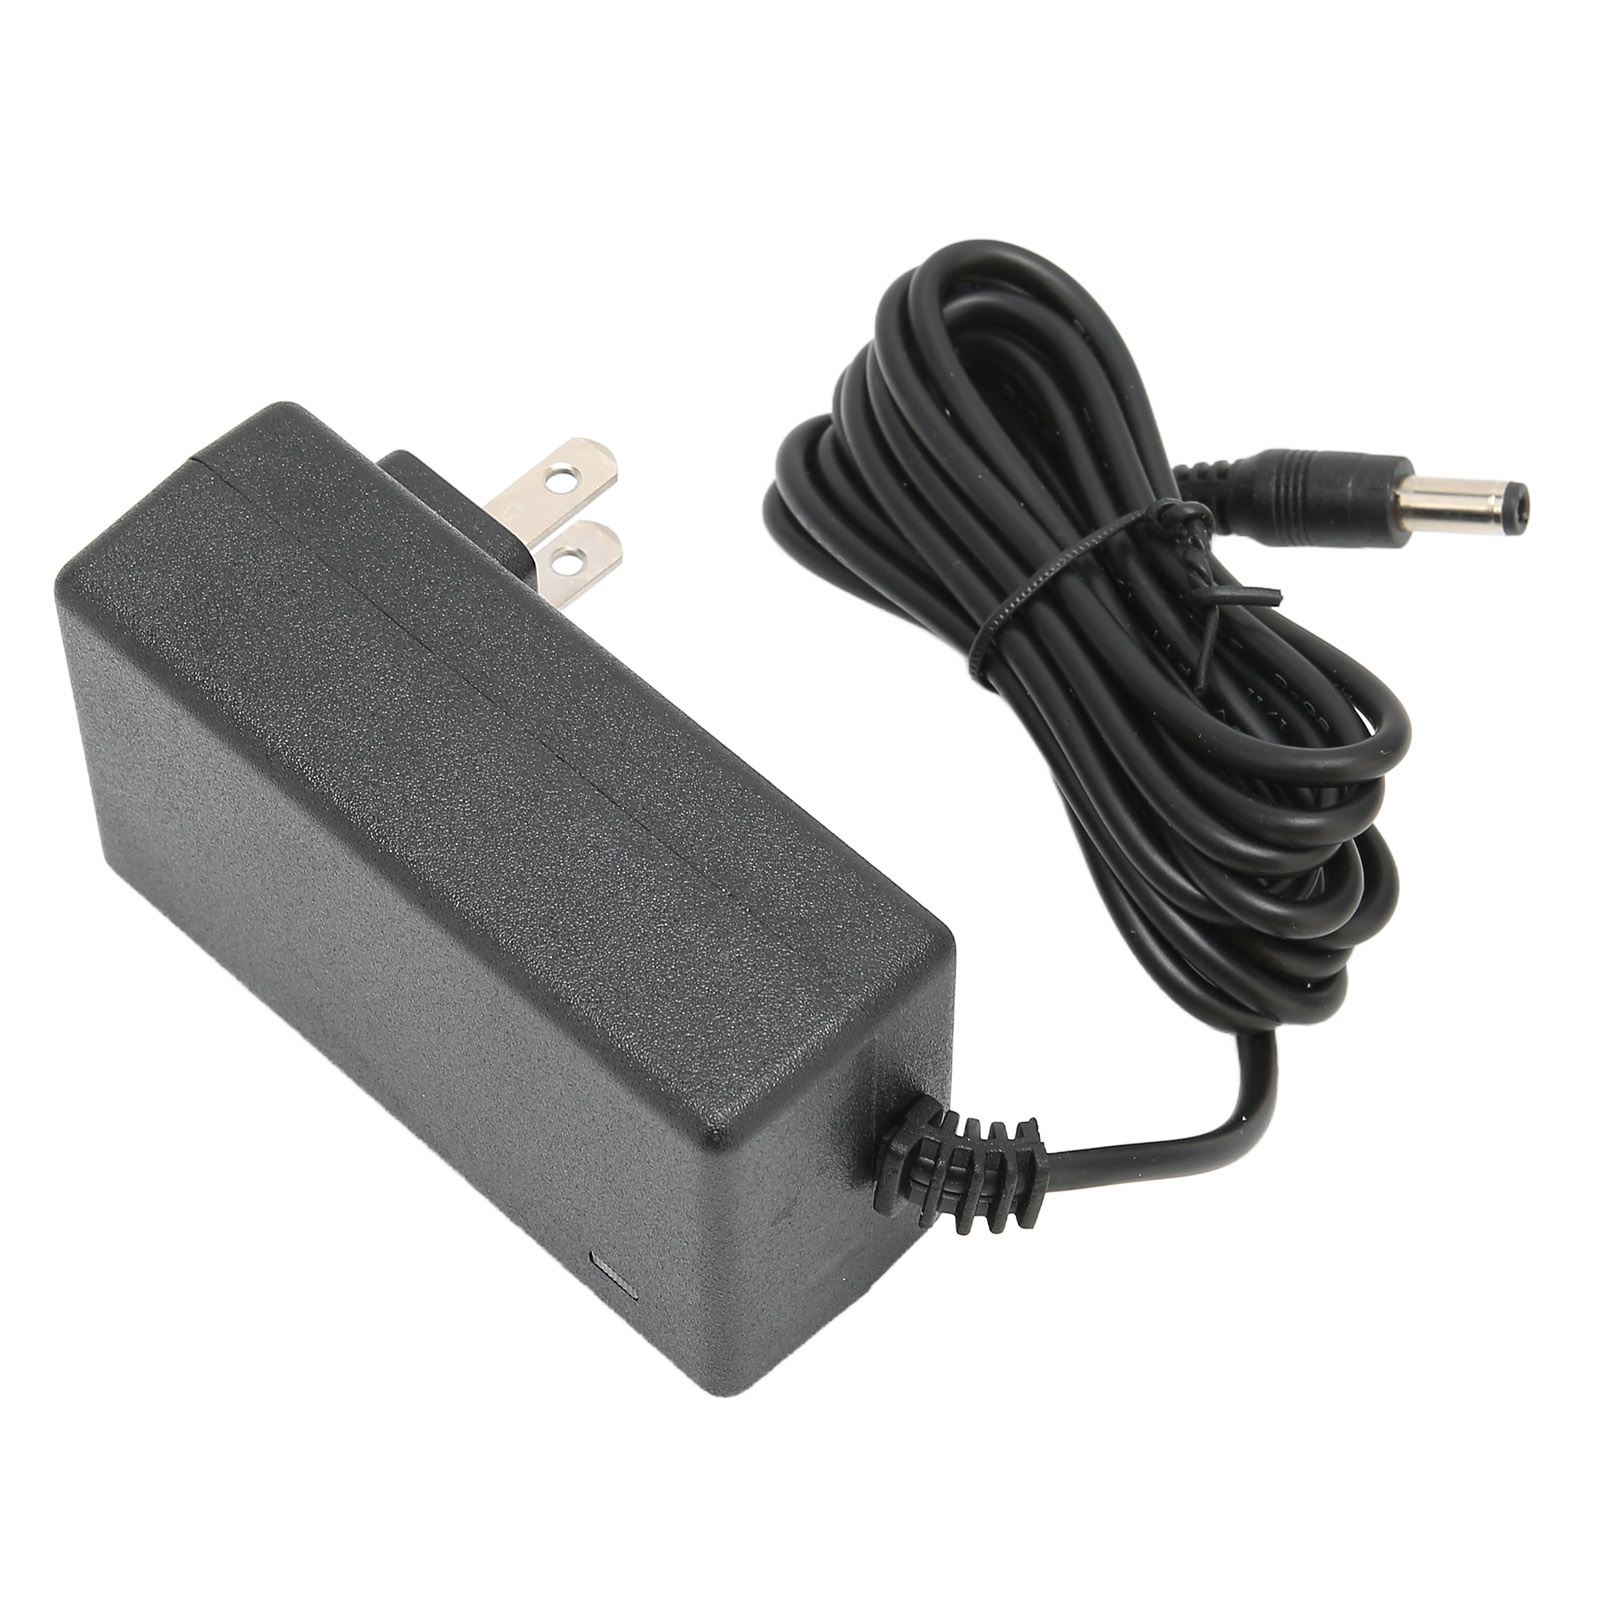 5V AC power adapter spare 10W power supply for Creative Zen Vision W player Type - Click Image to Close